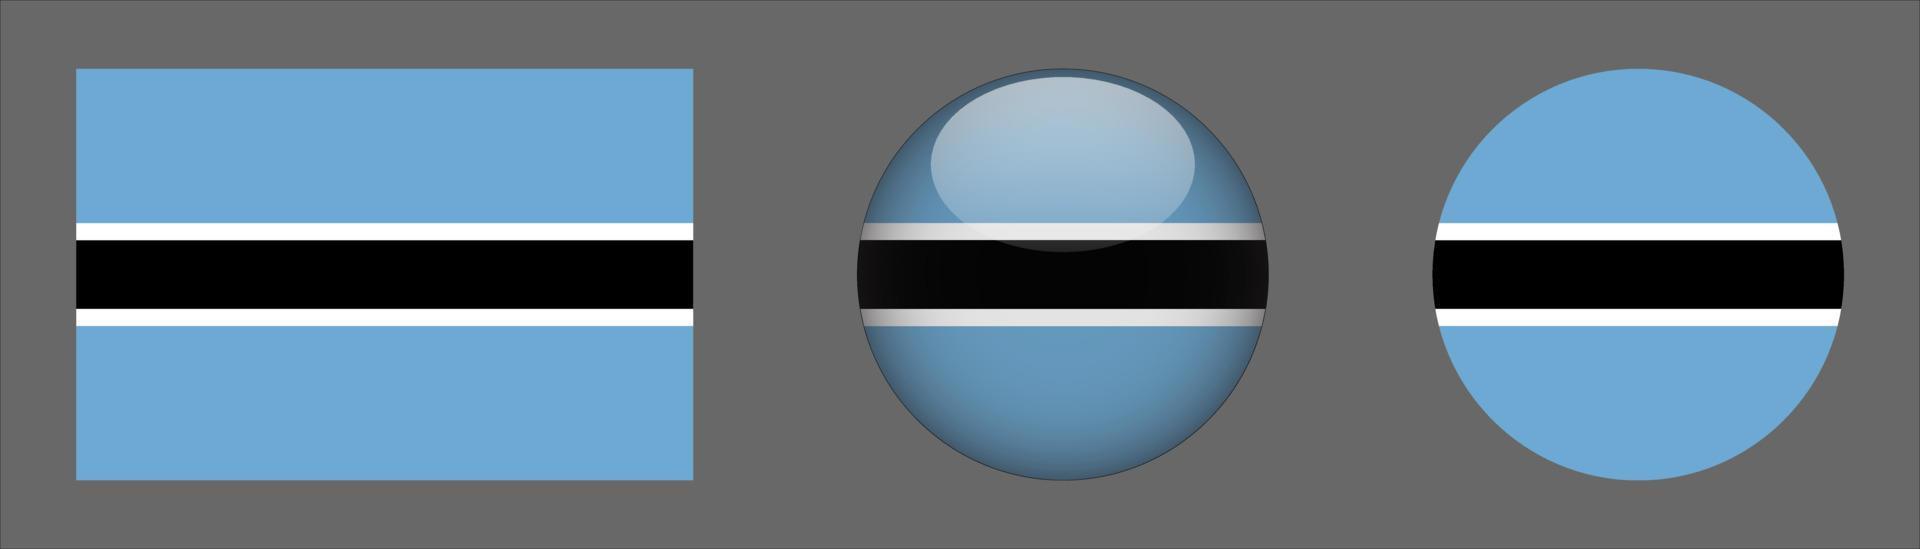 Botswana Flag Set Collection, Original Size Ratio, 3d Rounded and Flat Rounded vector